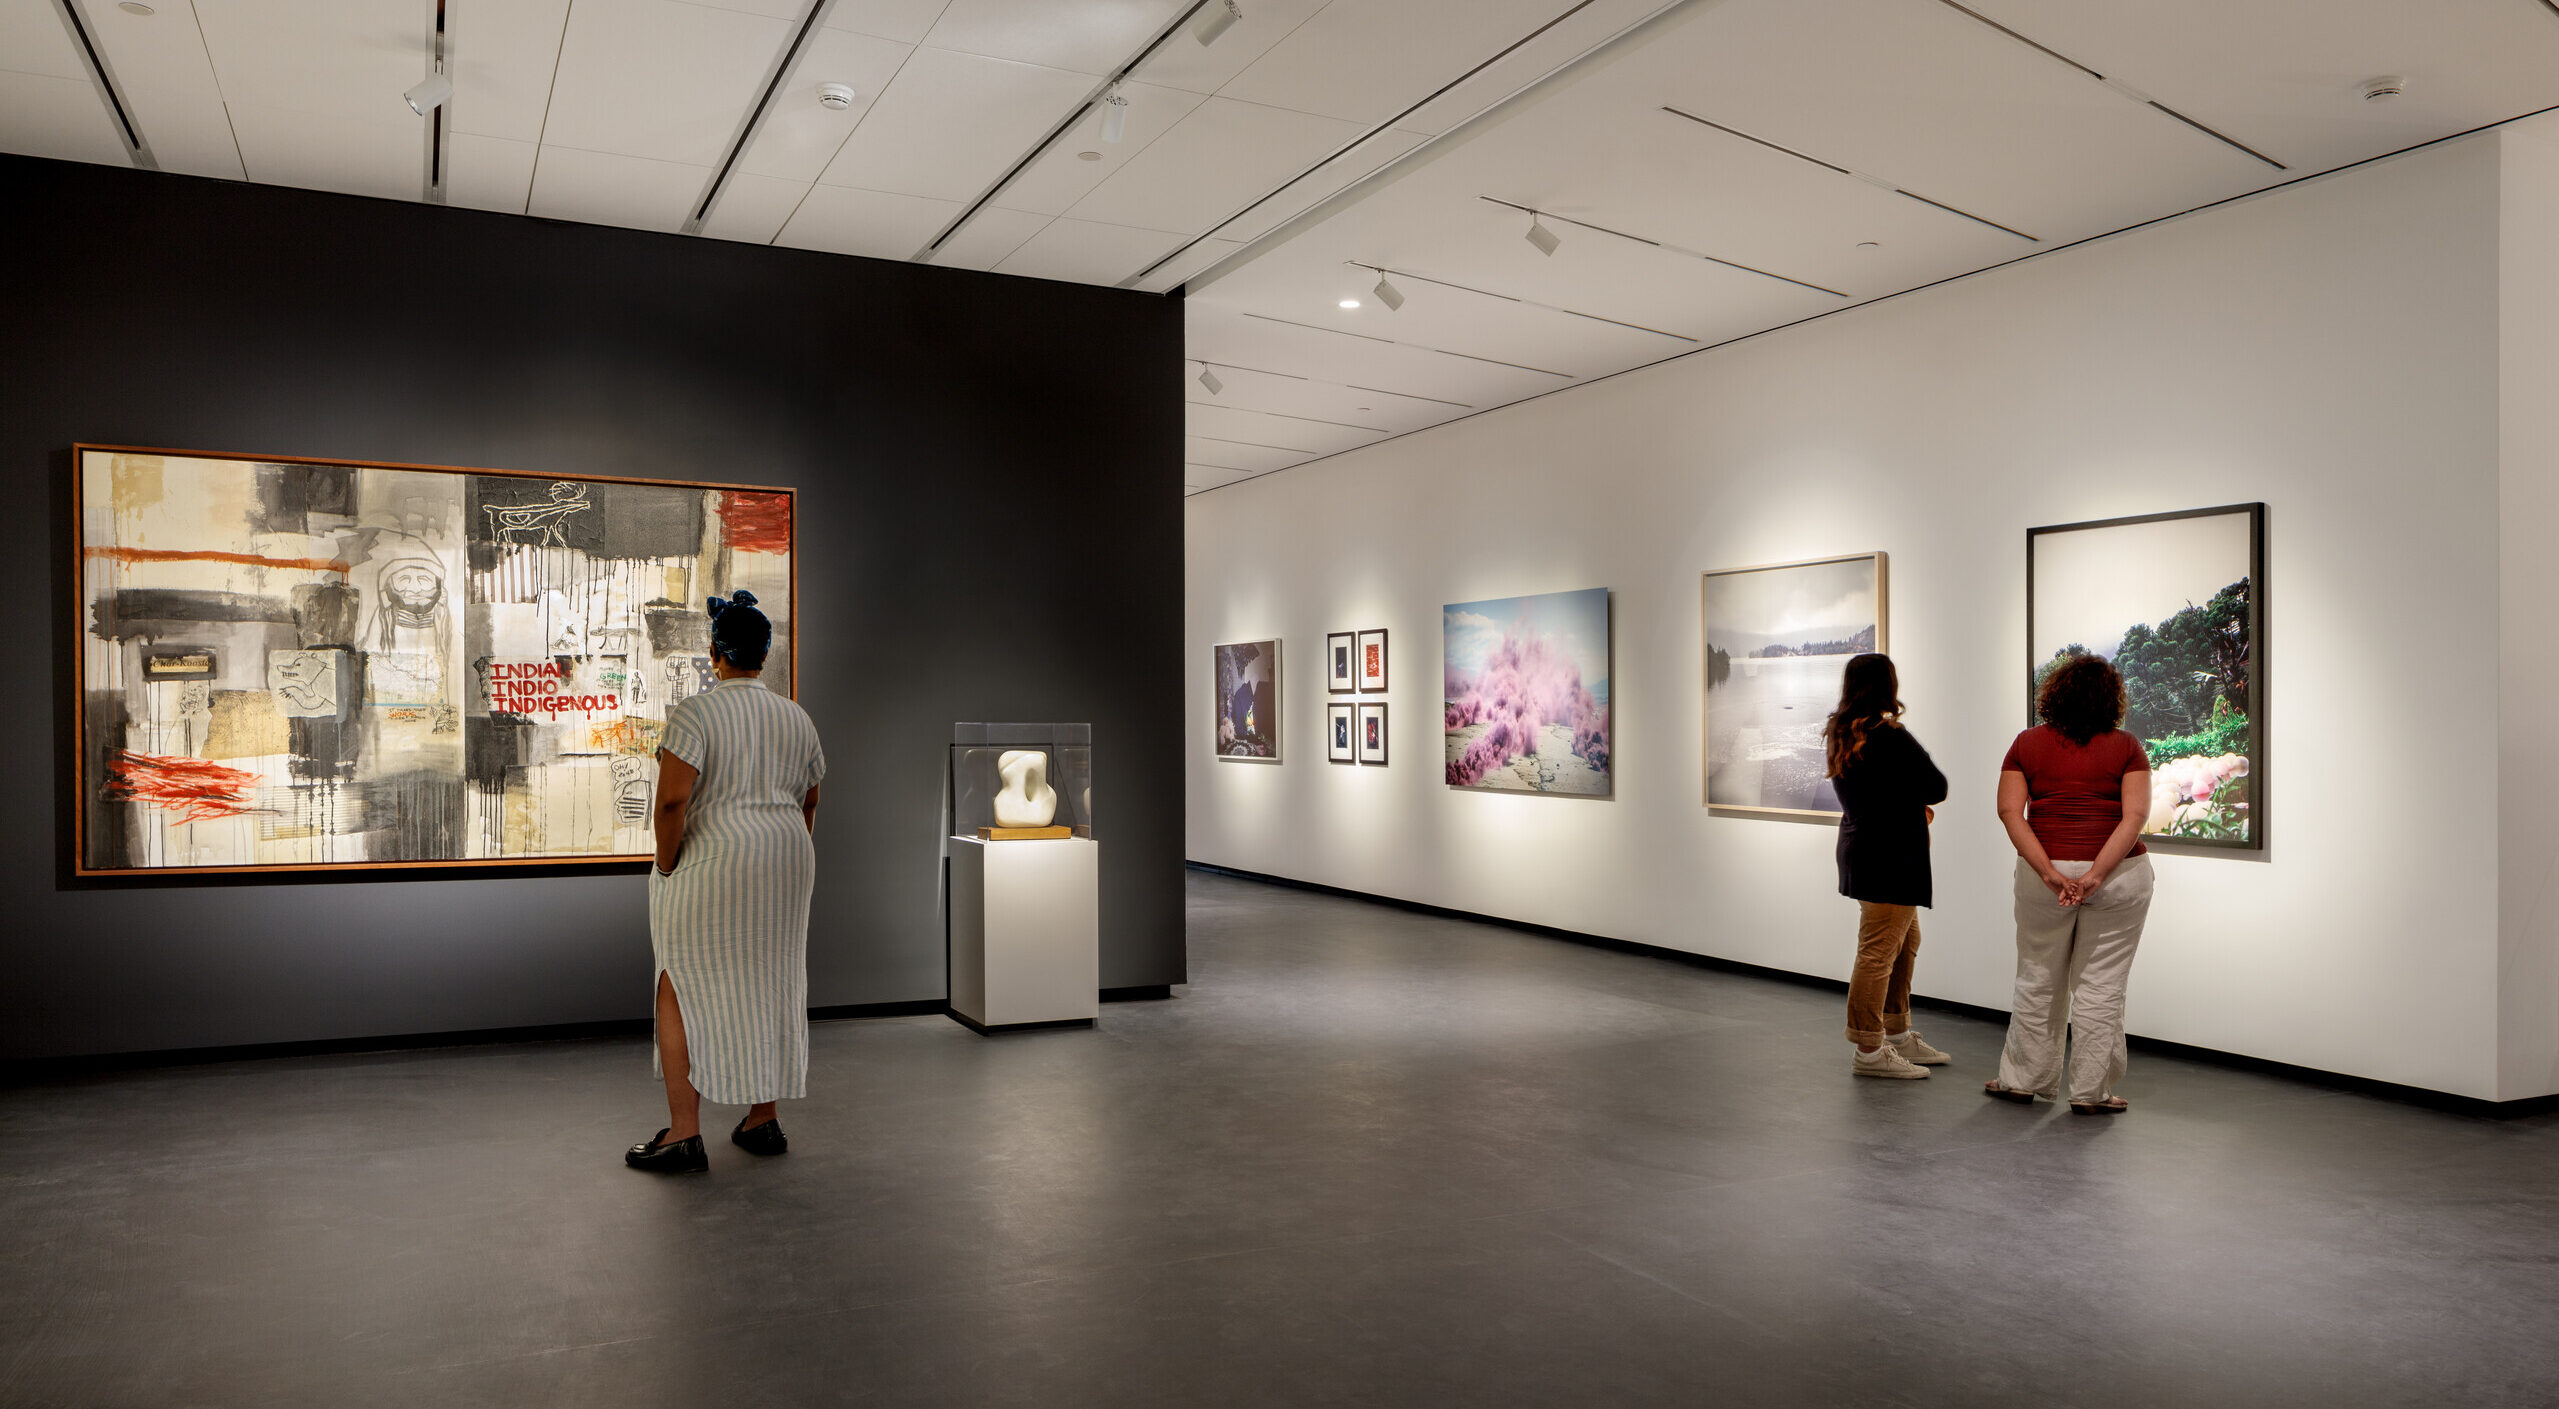 A modern museum gallery is photographed at a wide angle. Visitors observe large artworks on the walls.